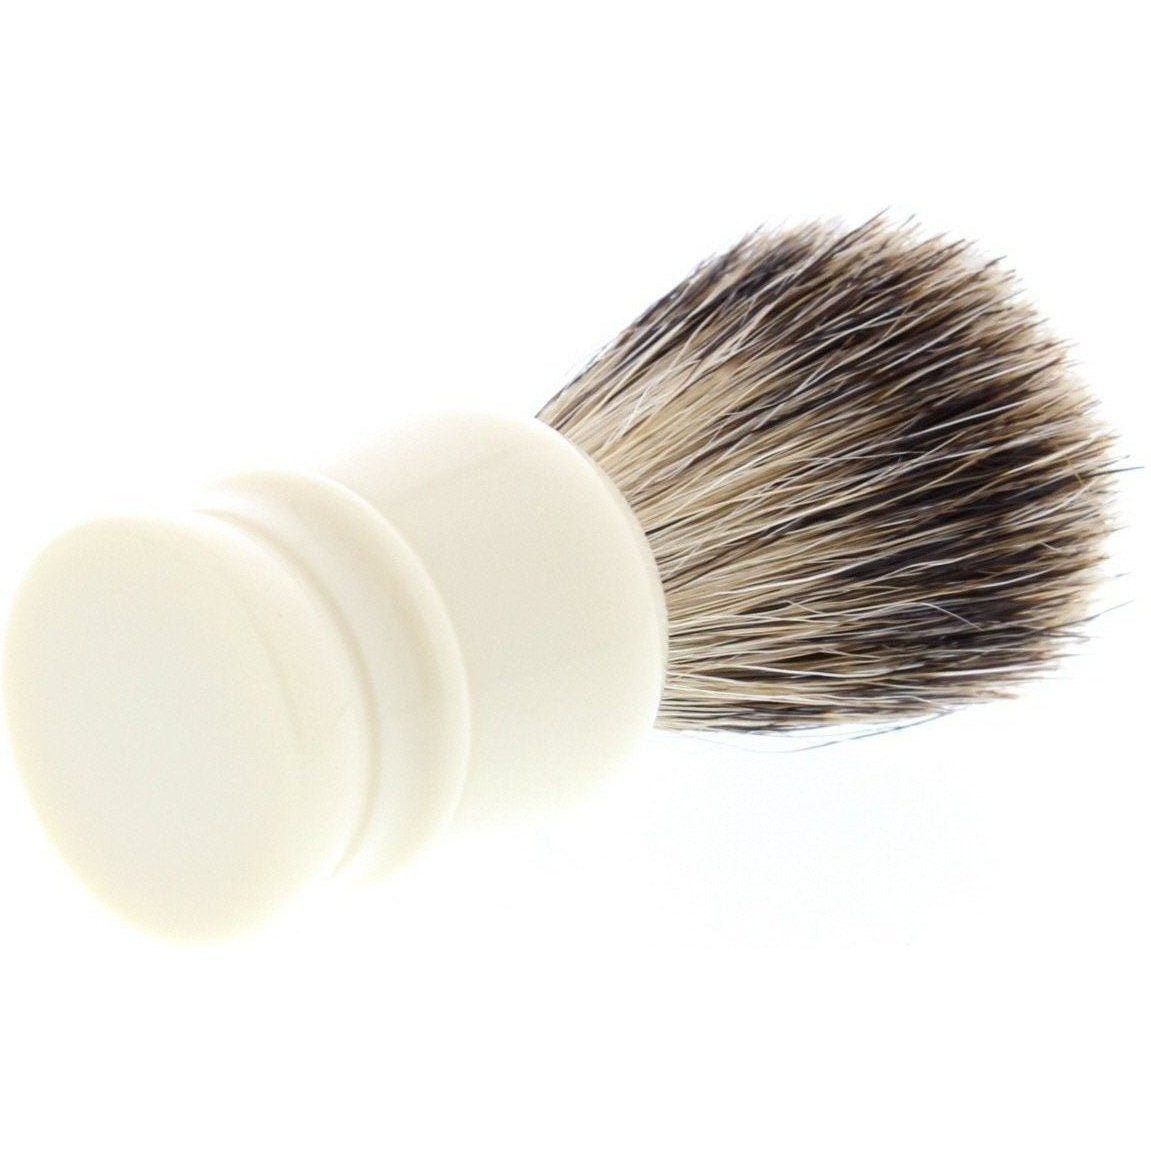 Product image 2 for Simpson Wee Scot Best Badger Shaving Brush